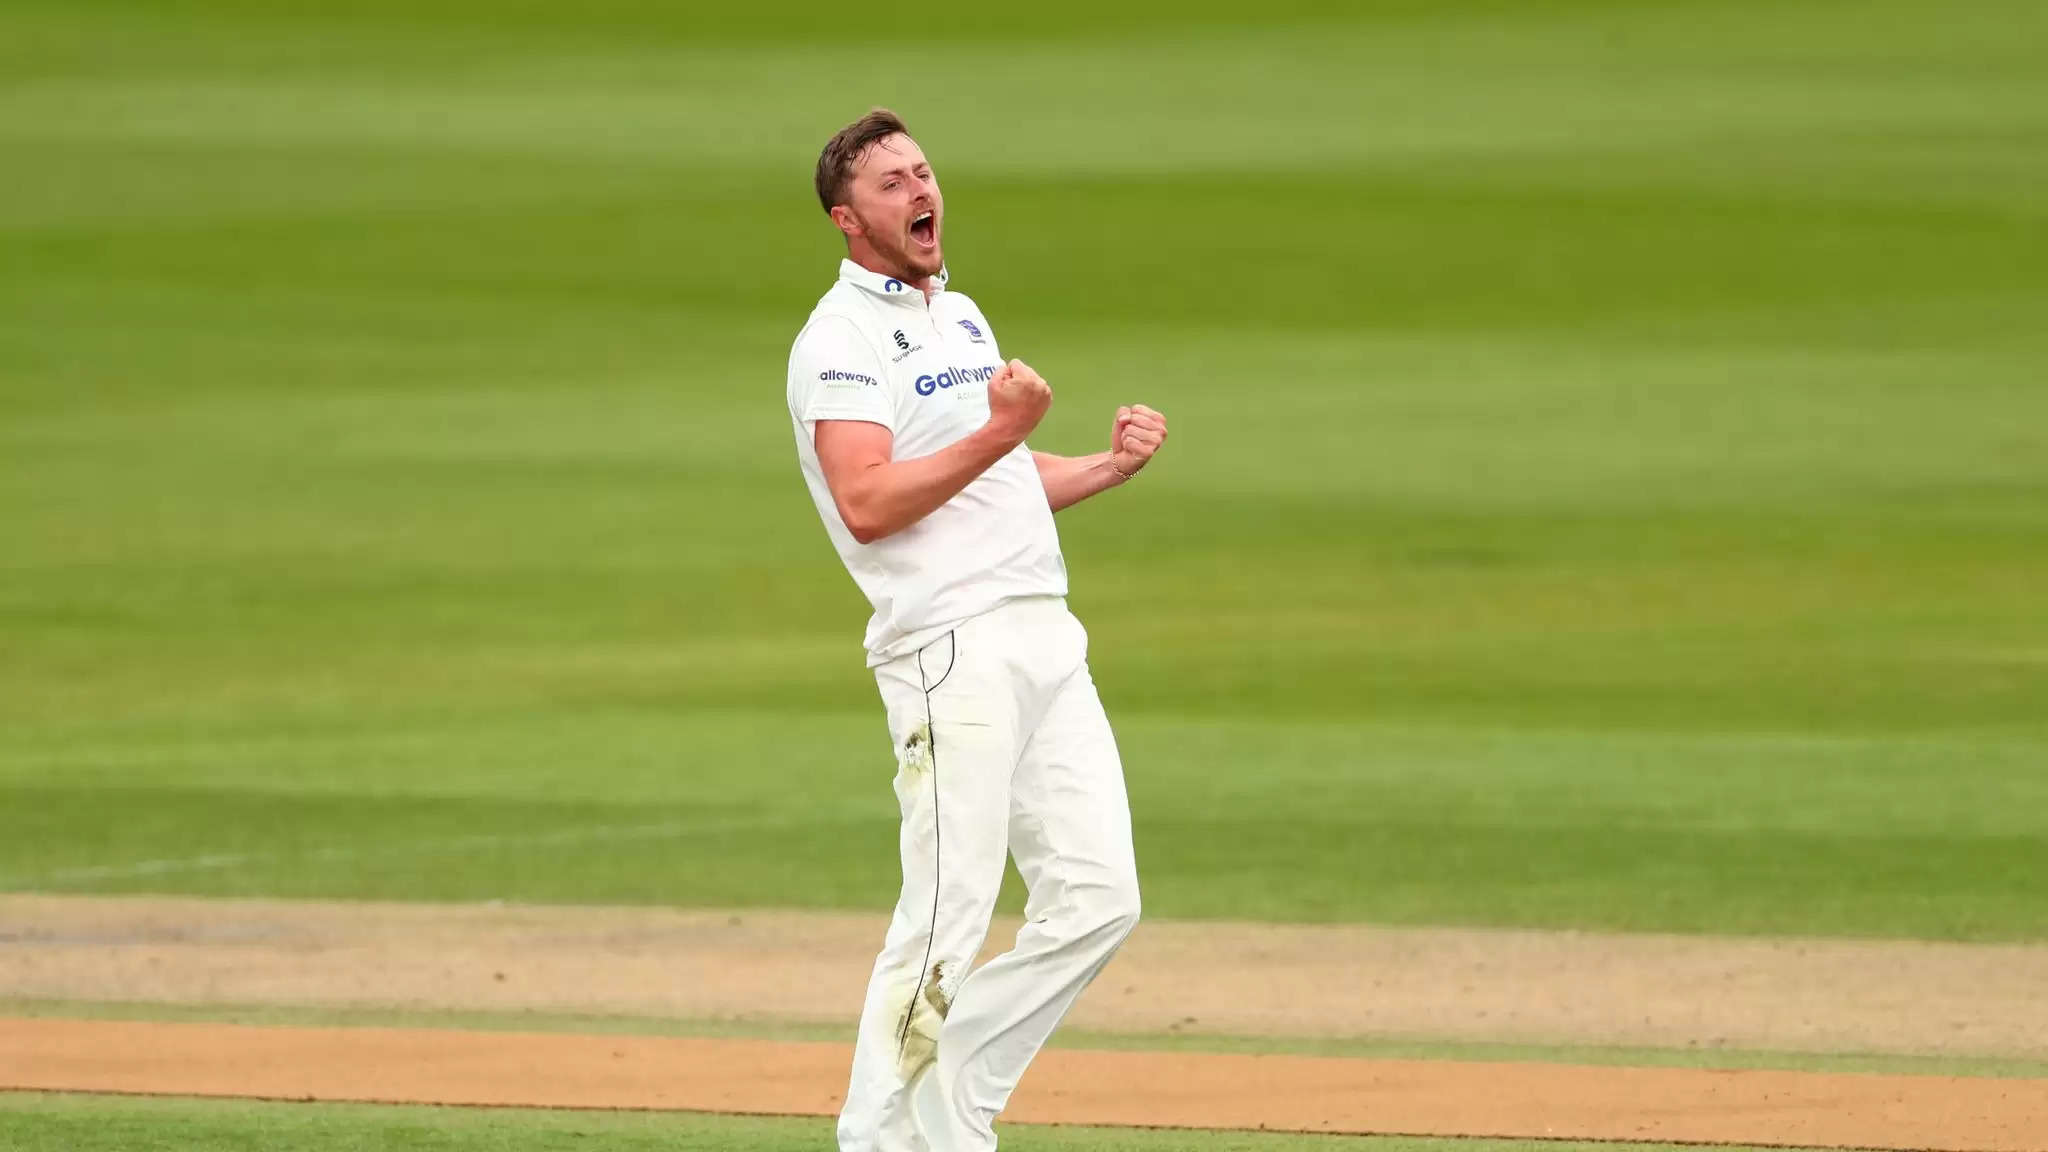 WATCH – Ollie Robinson starts Test career on a bright note, dismisses Tom Latham